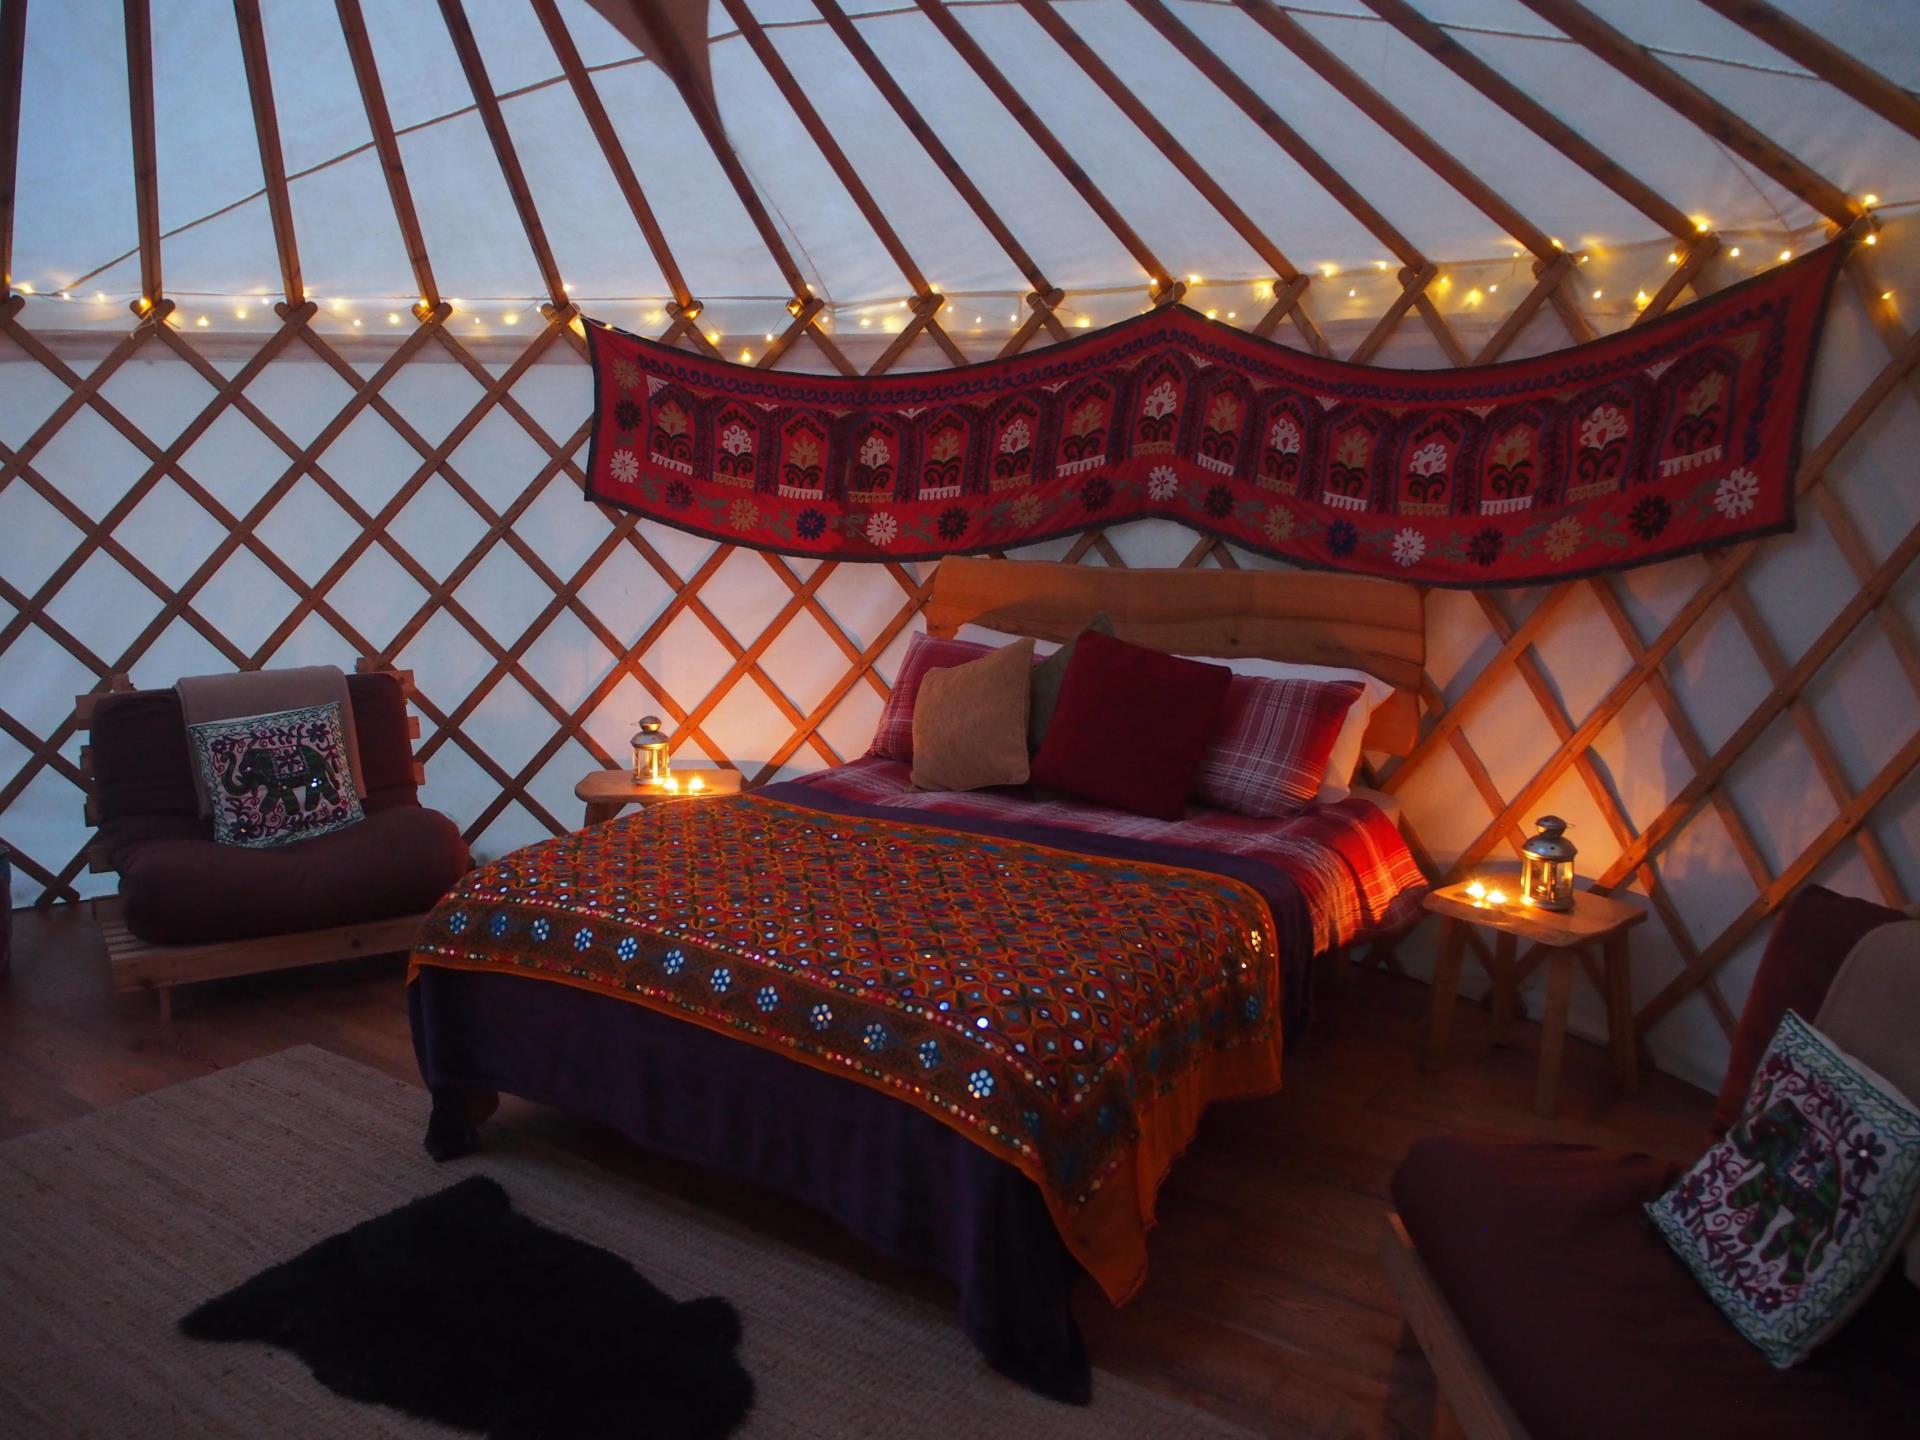 Our cosy yurts by night...